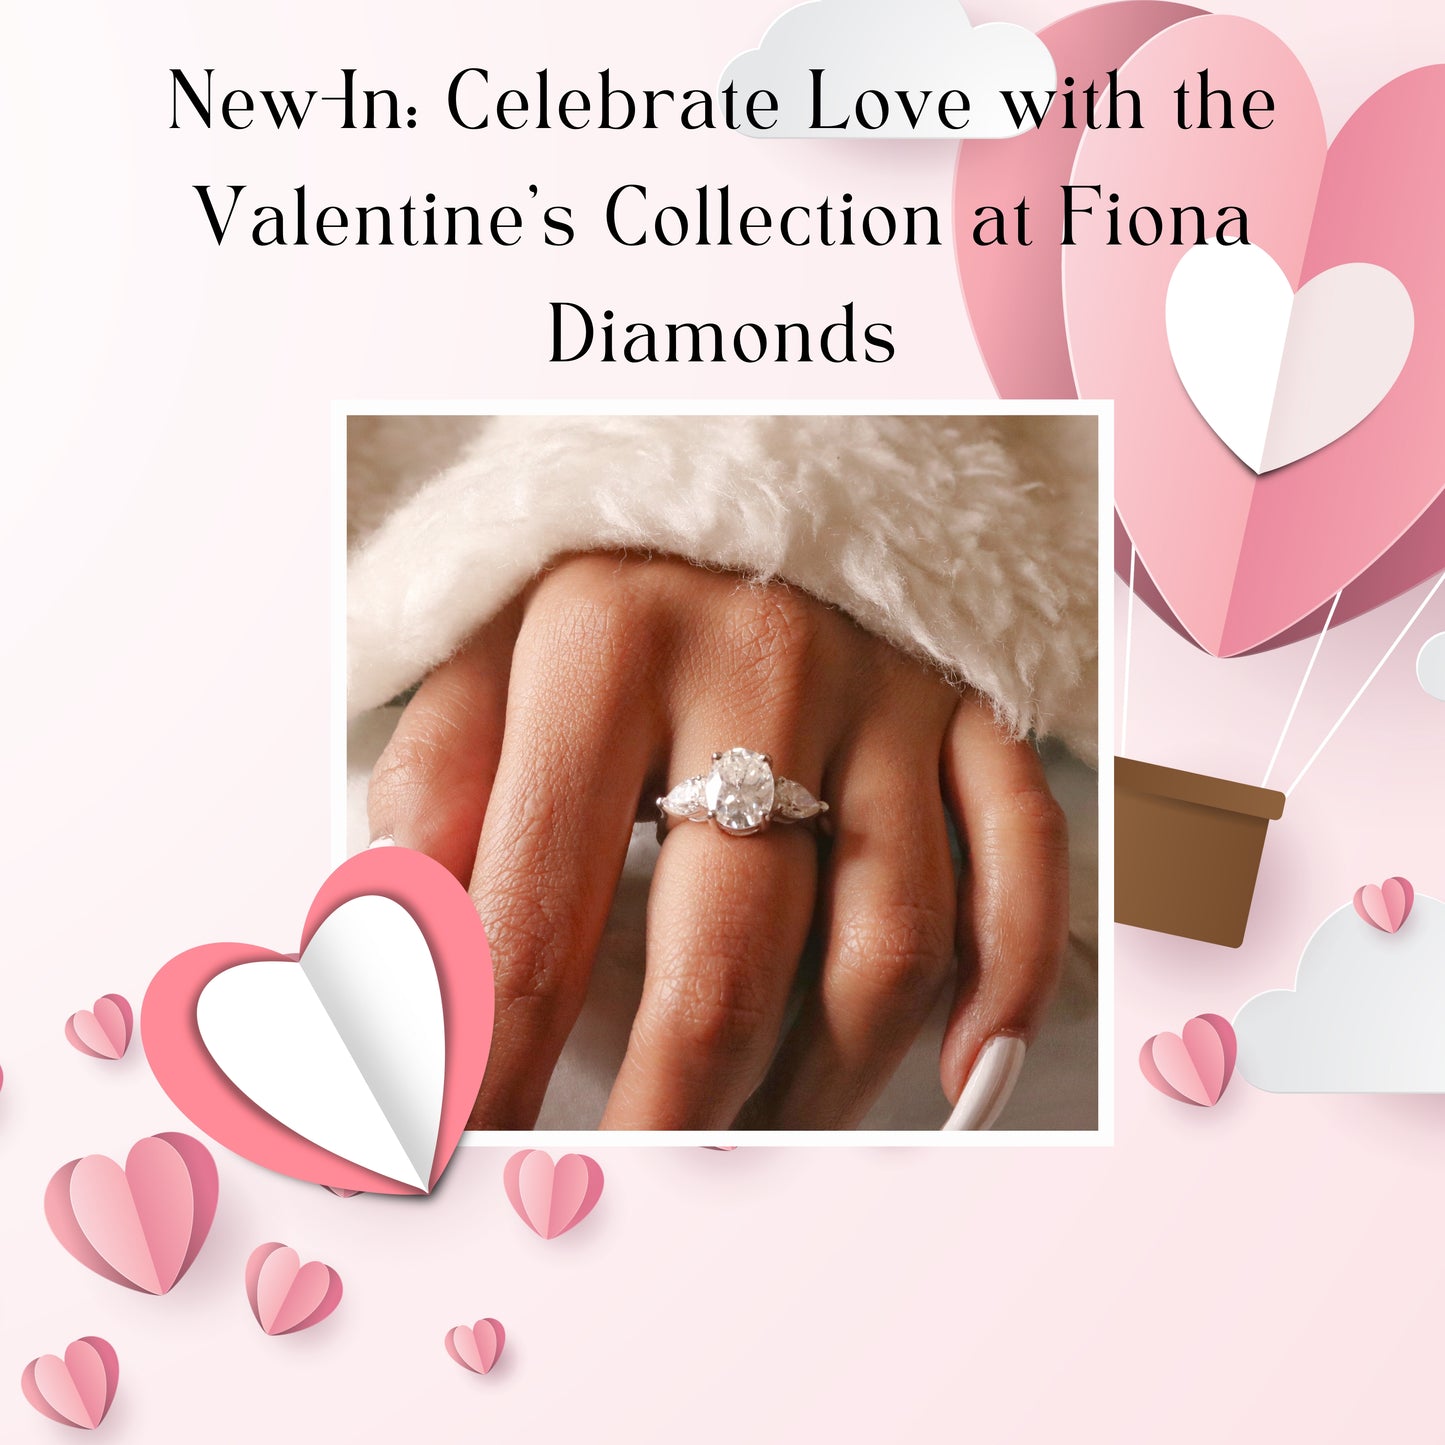 New-In: Celebrate Love with the Valentine's Collection at Fiona Diamonds